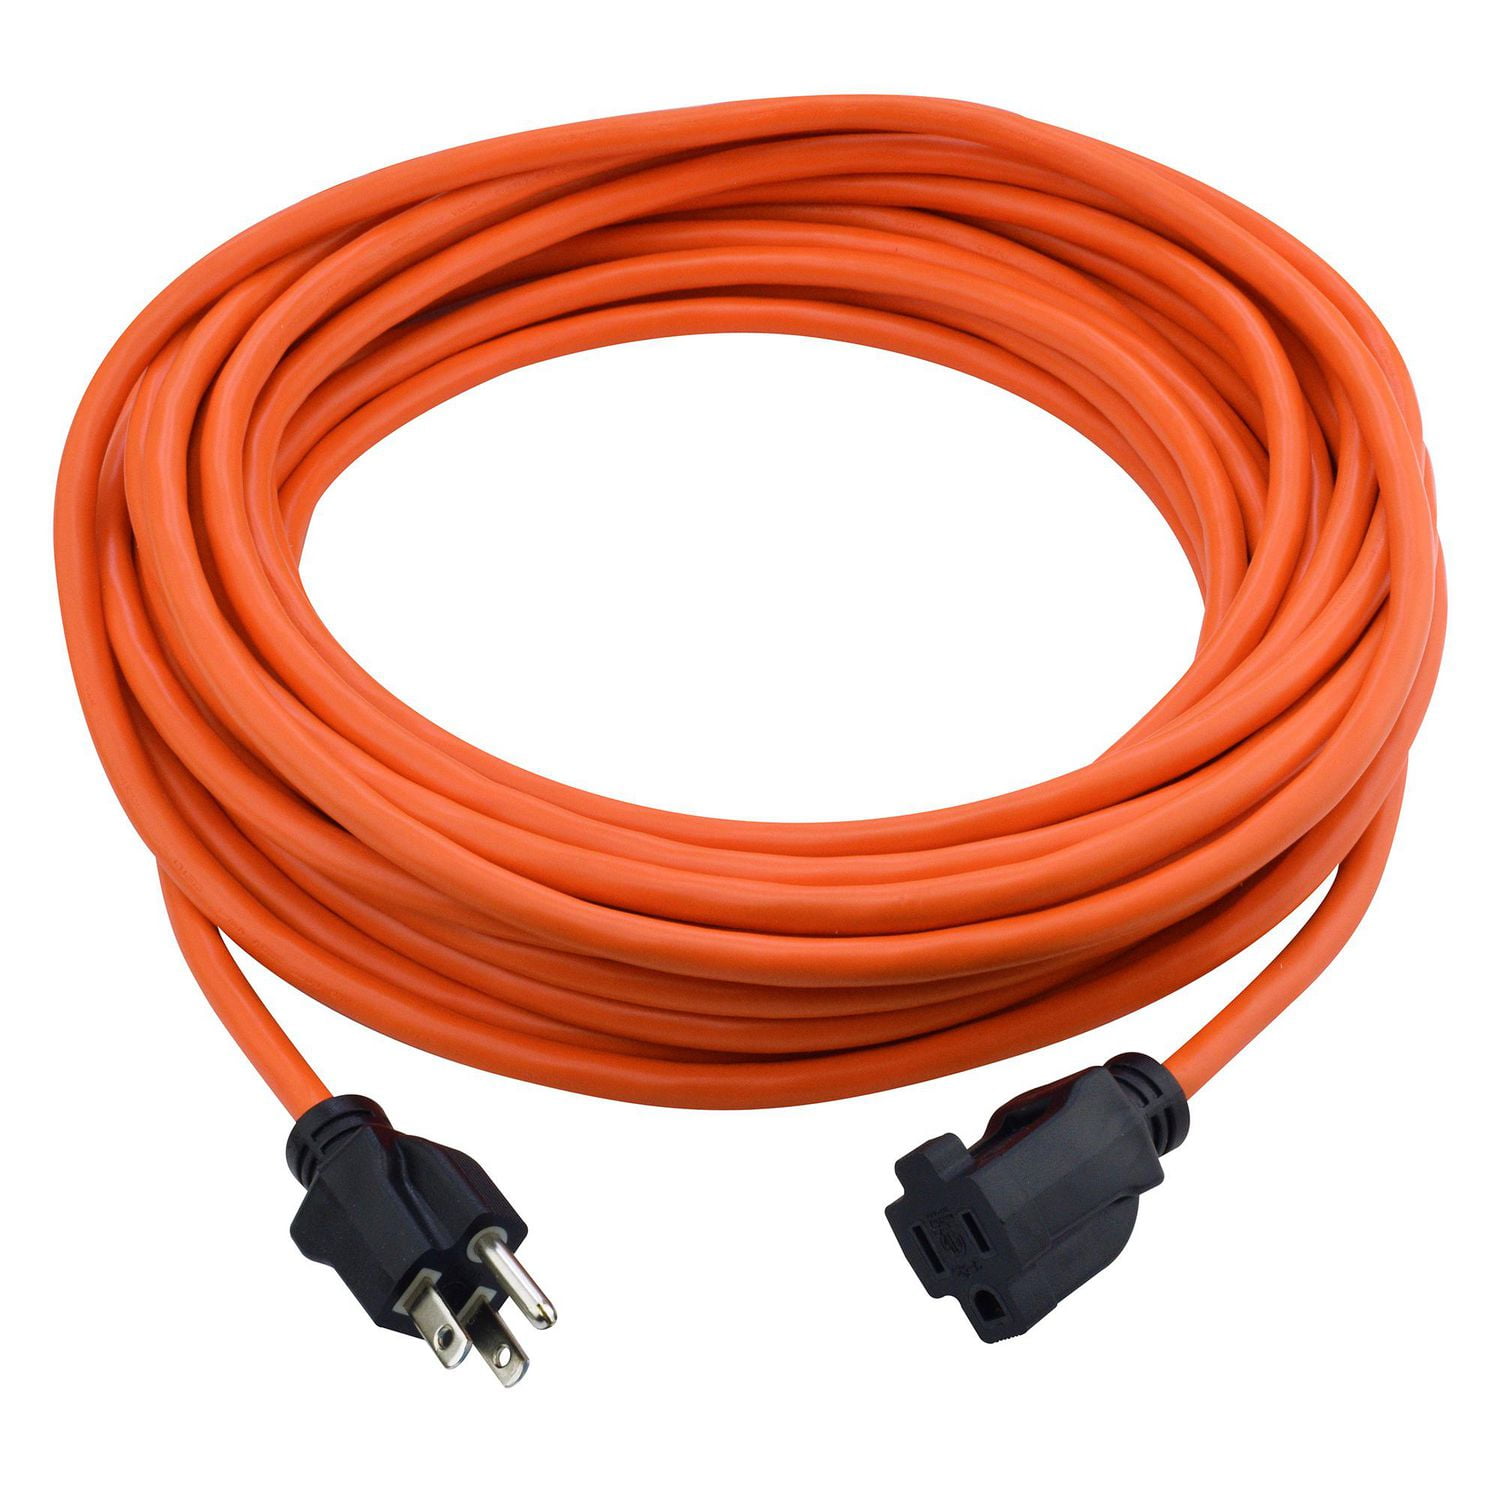 Buy Basics 16/3 Vinyl Outdoor Extension Cord - 50 Feet (Orange)  Online at Low Prices in India 